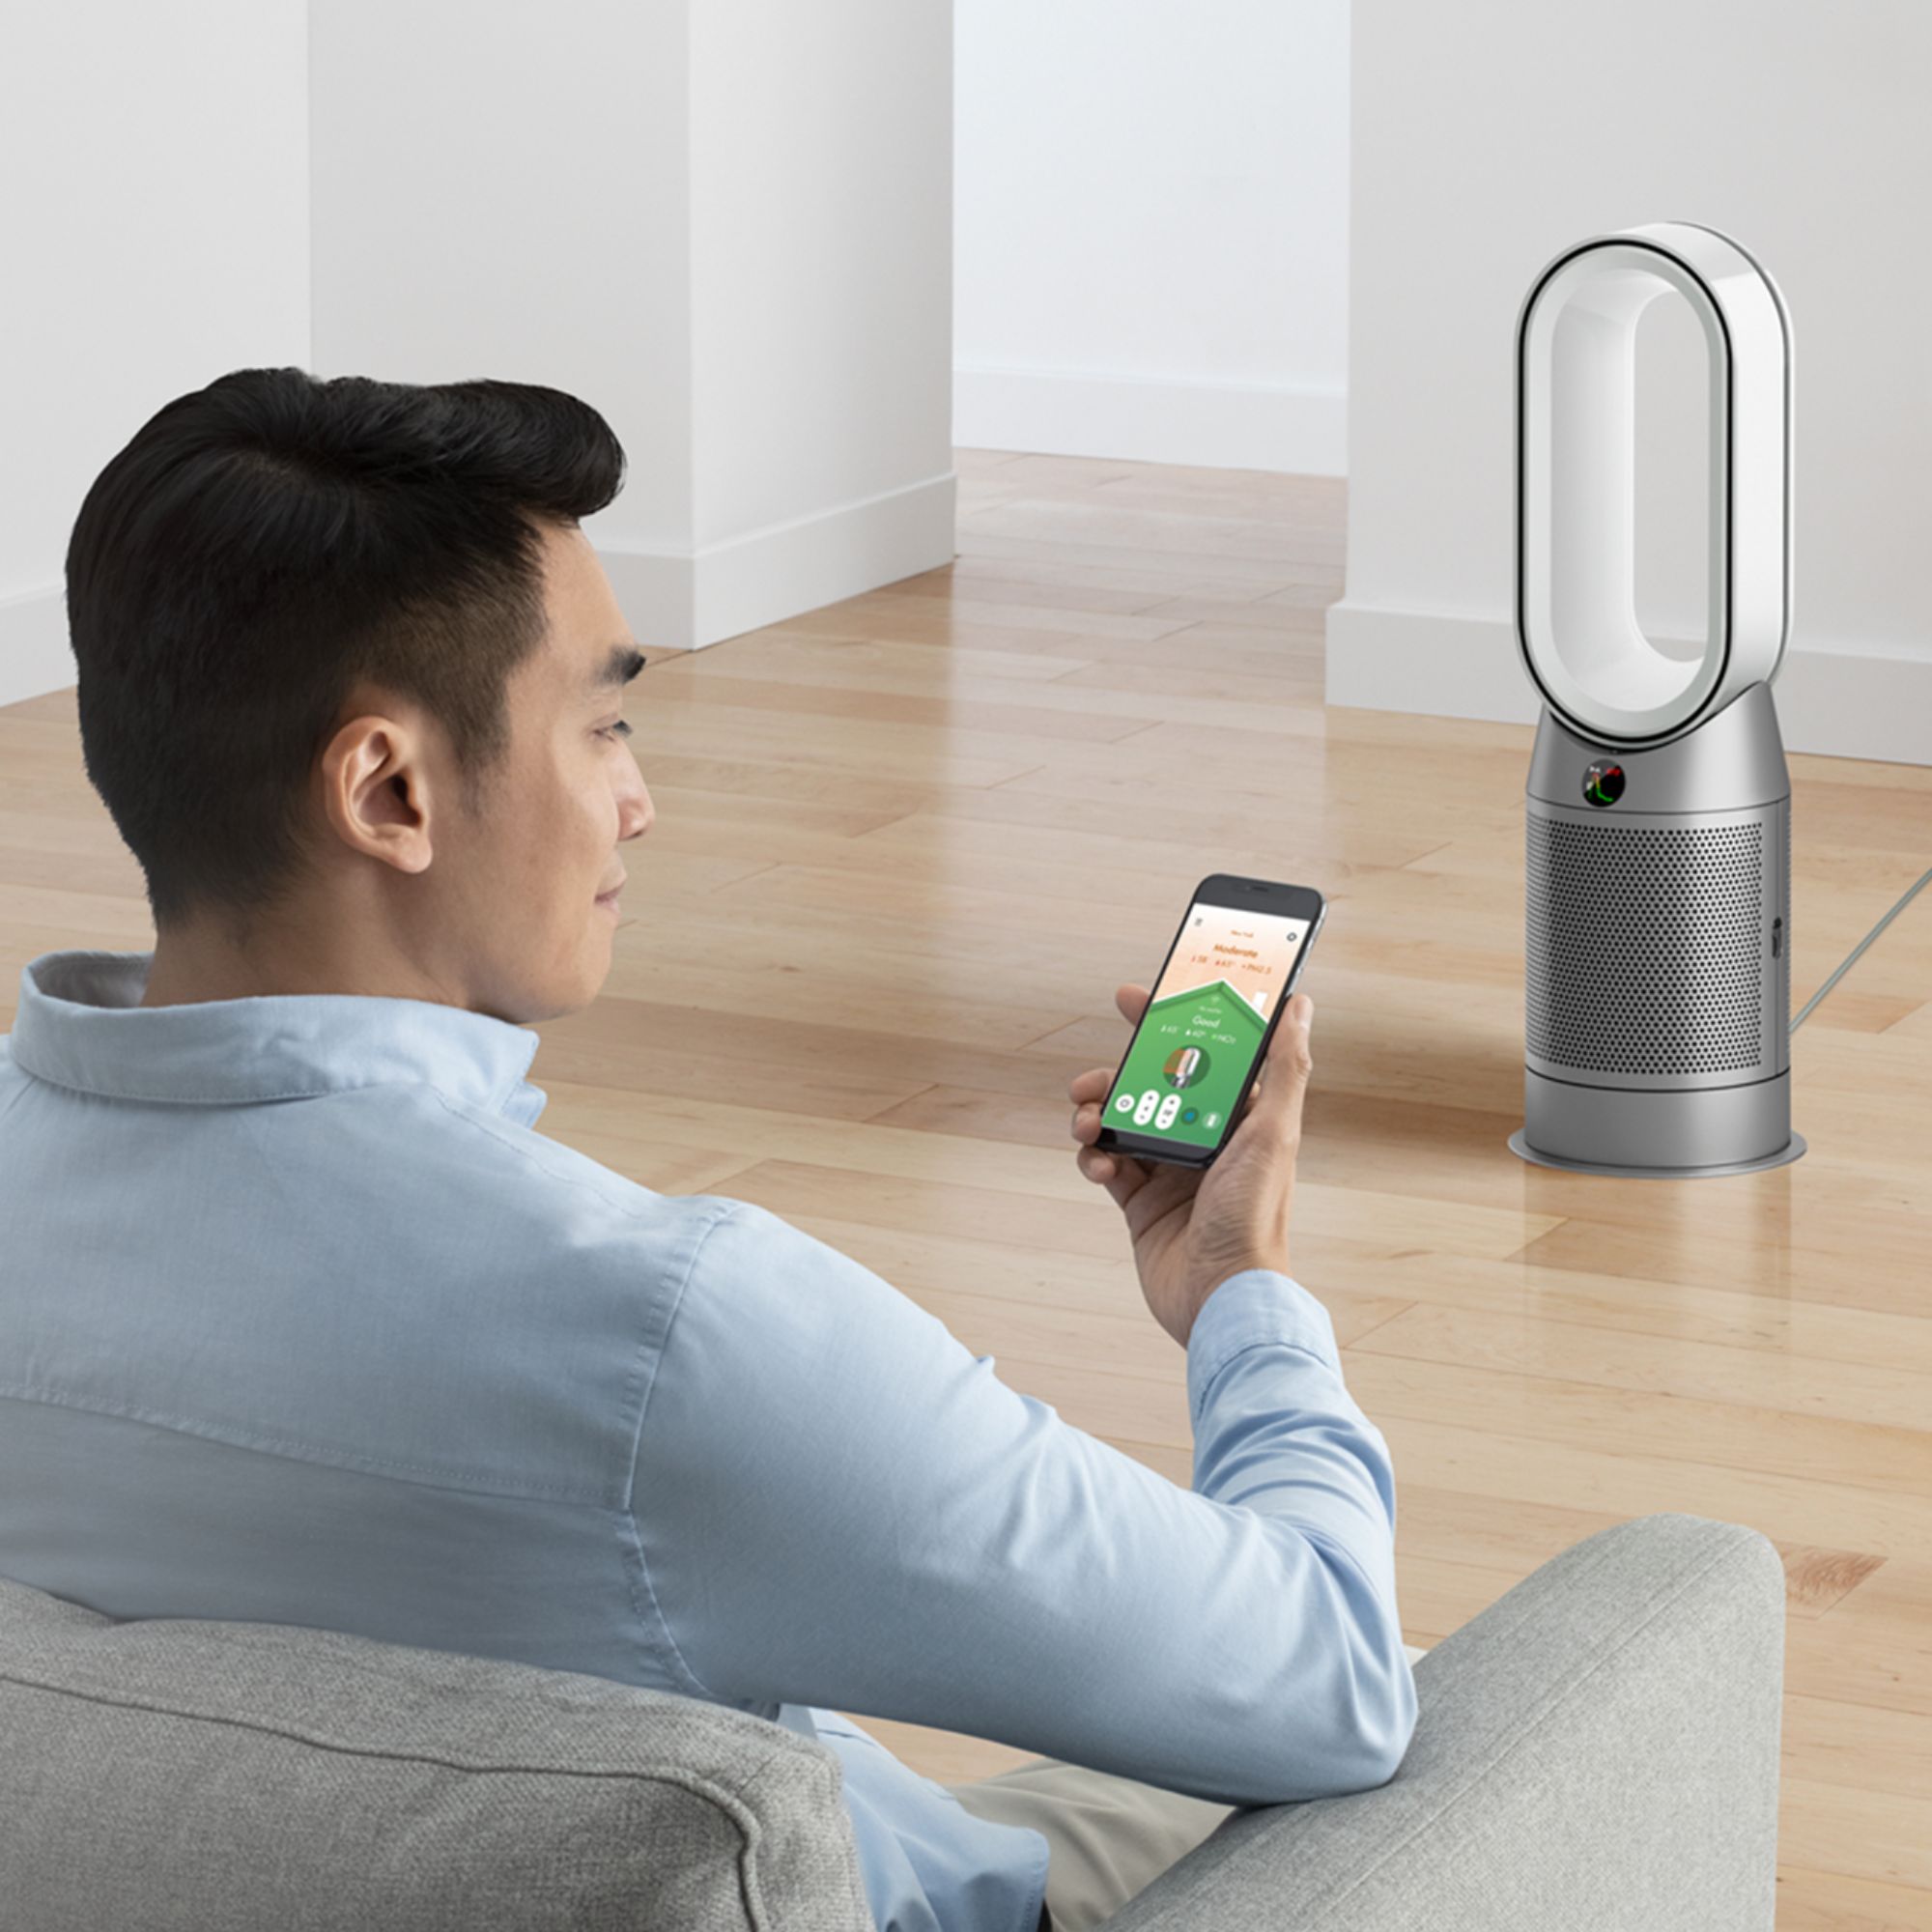 Dyson Purifier Hot+Cool HP07 Smart Tower Air Purifier, Heater and 